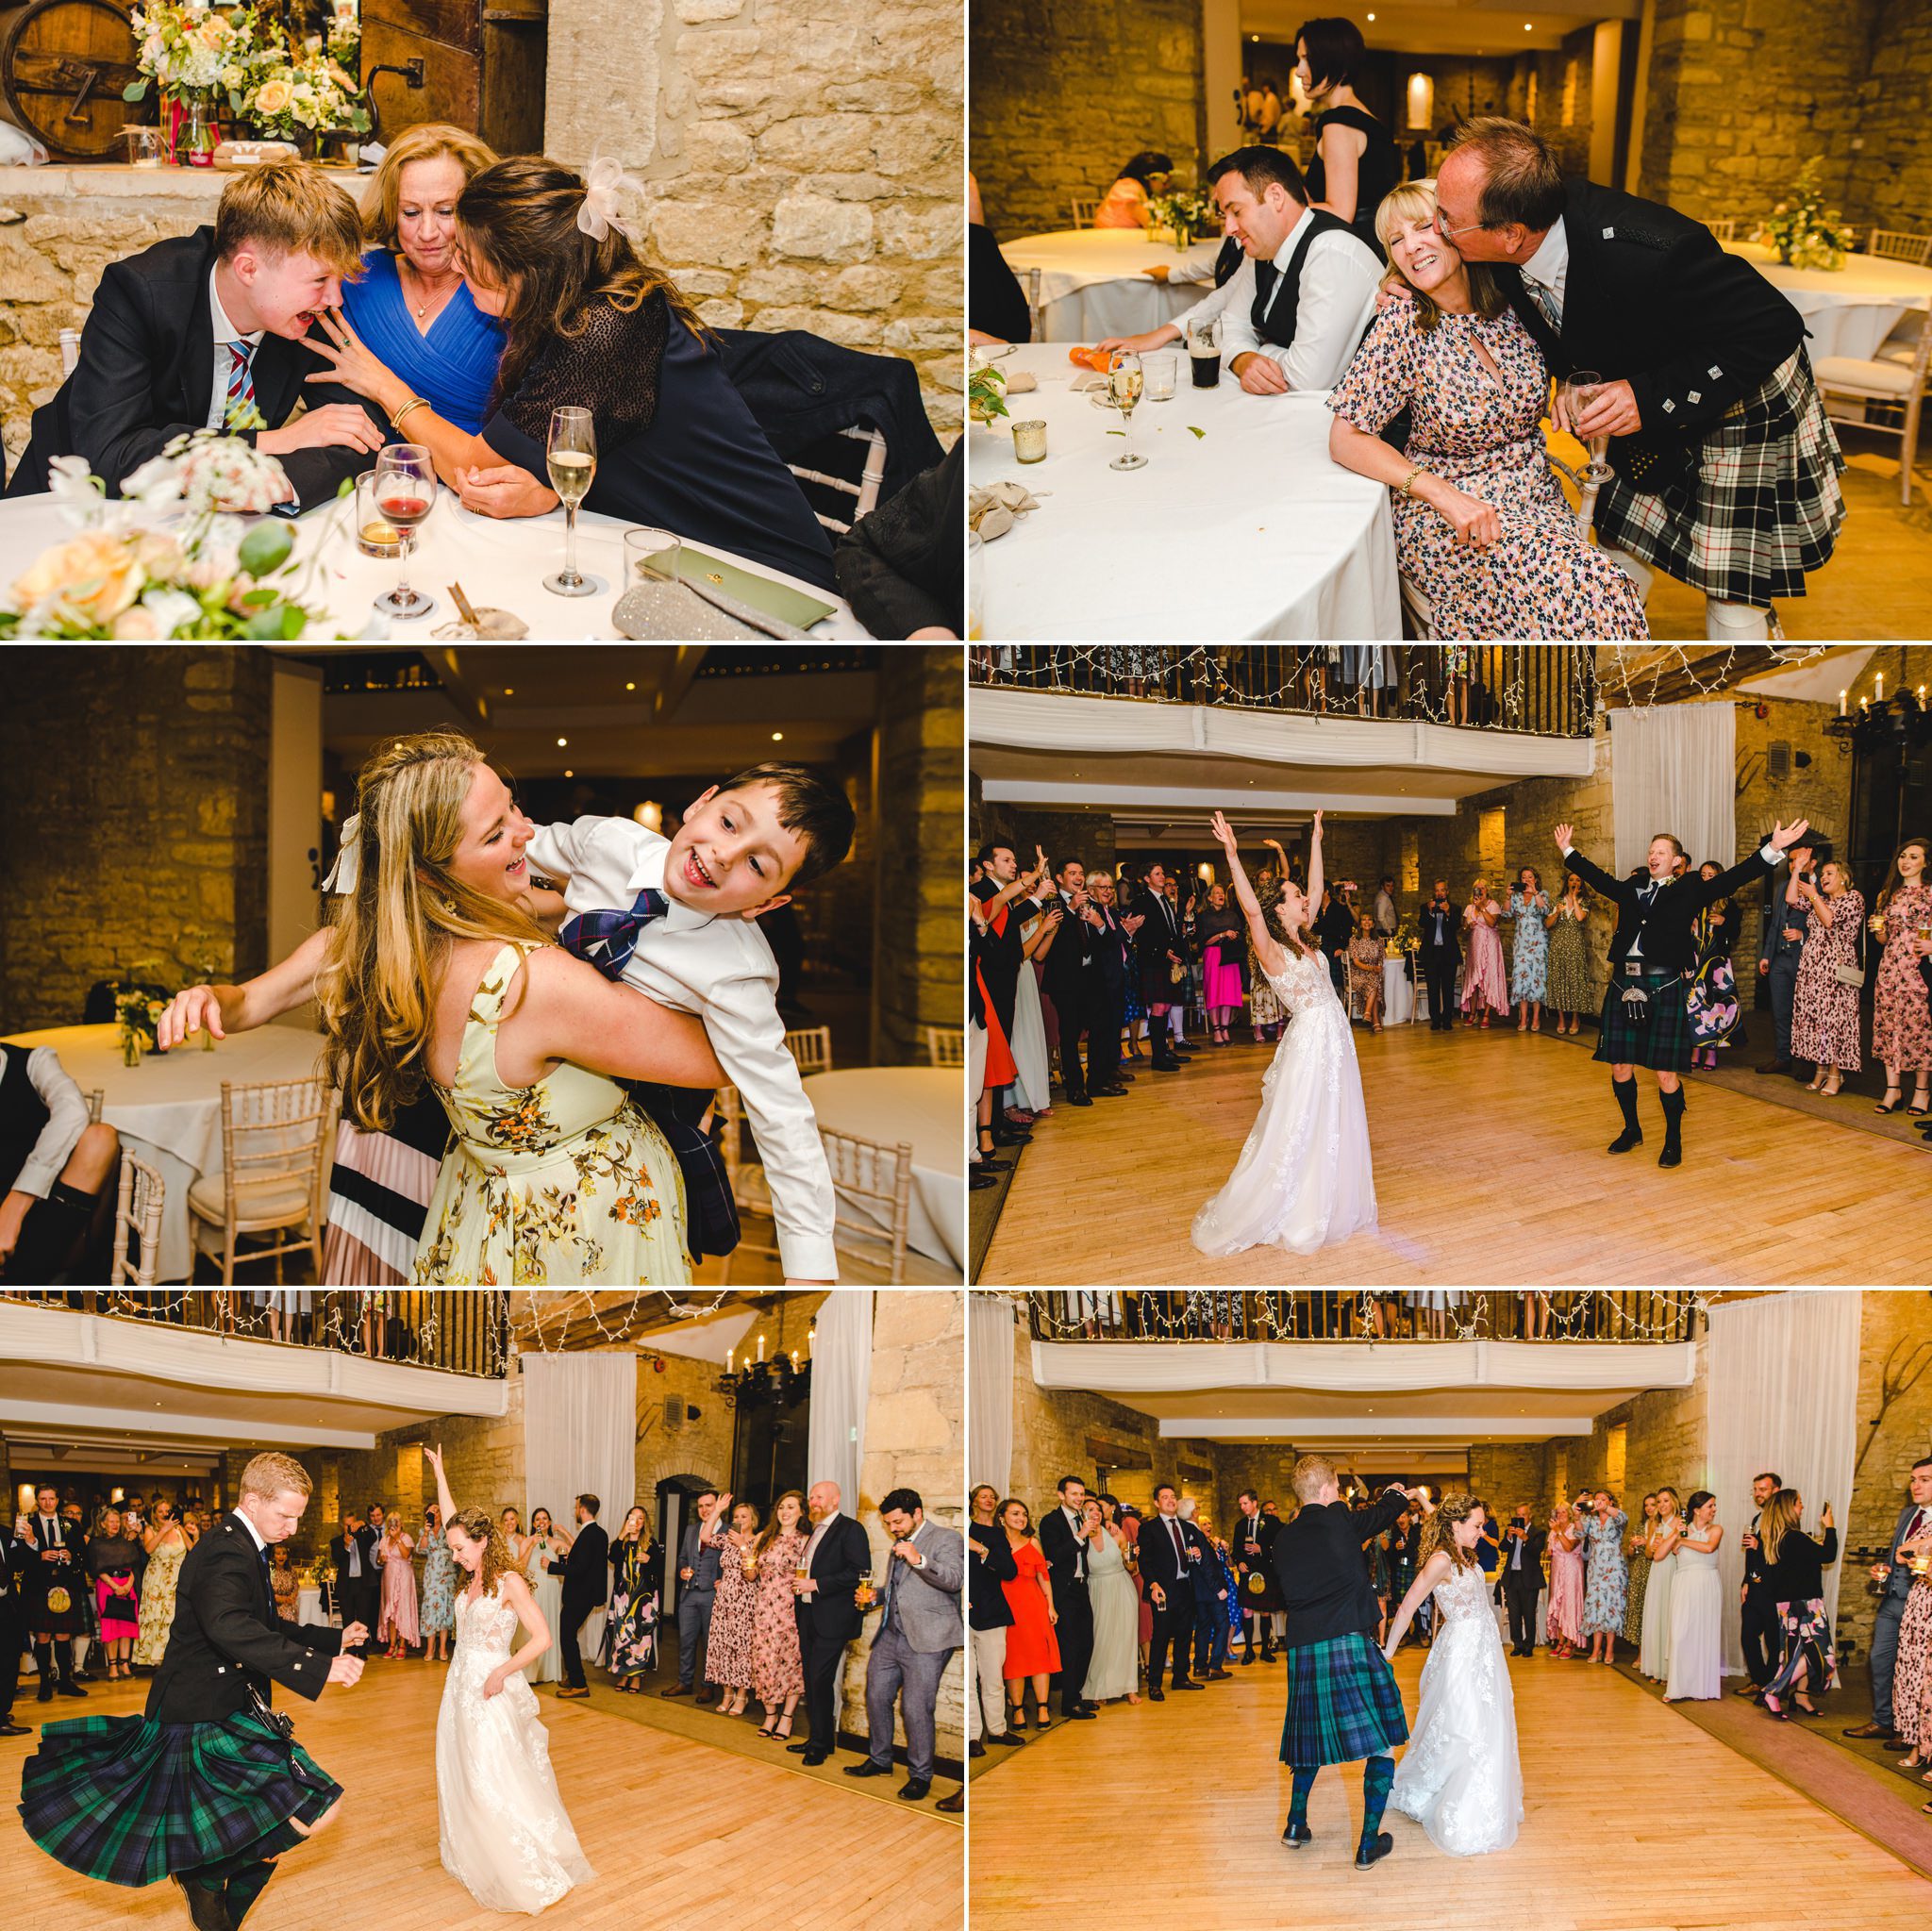 Dancing at The Great Tythe Barn by Bigeye Photography